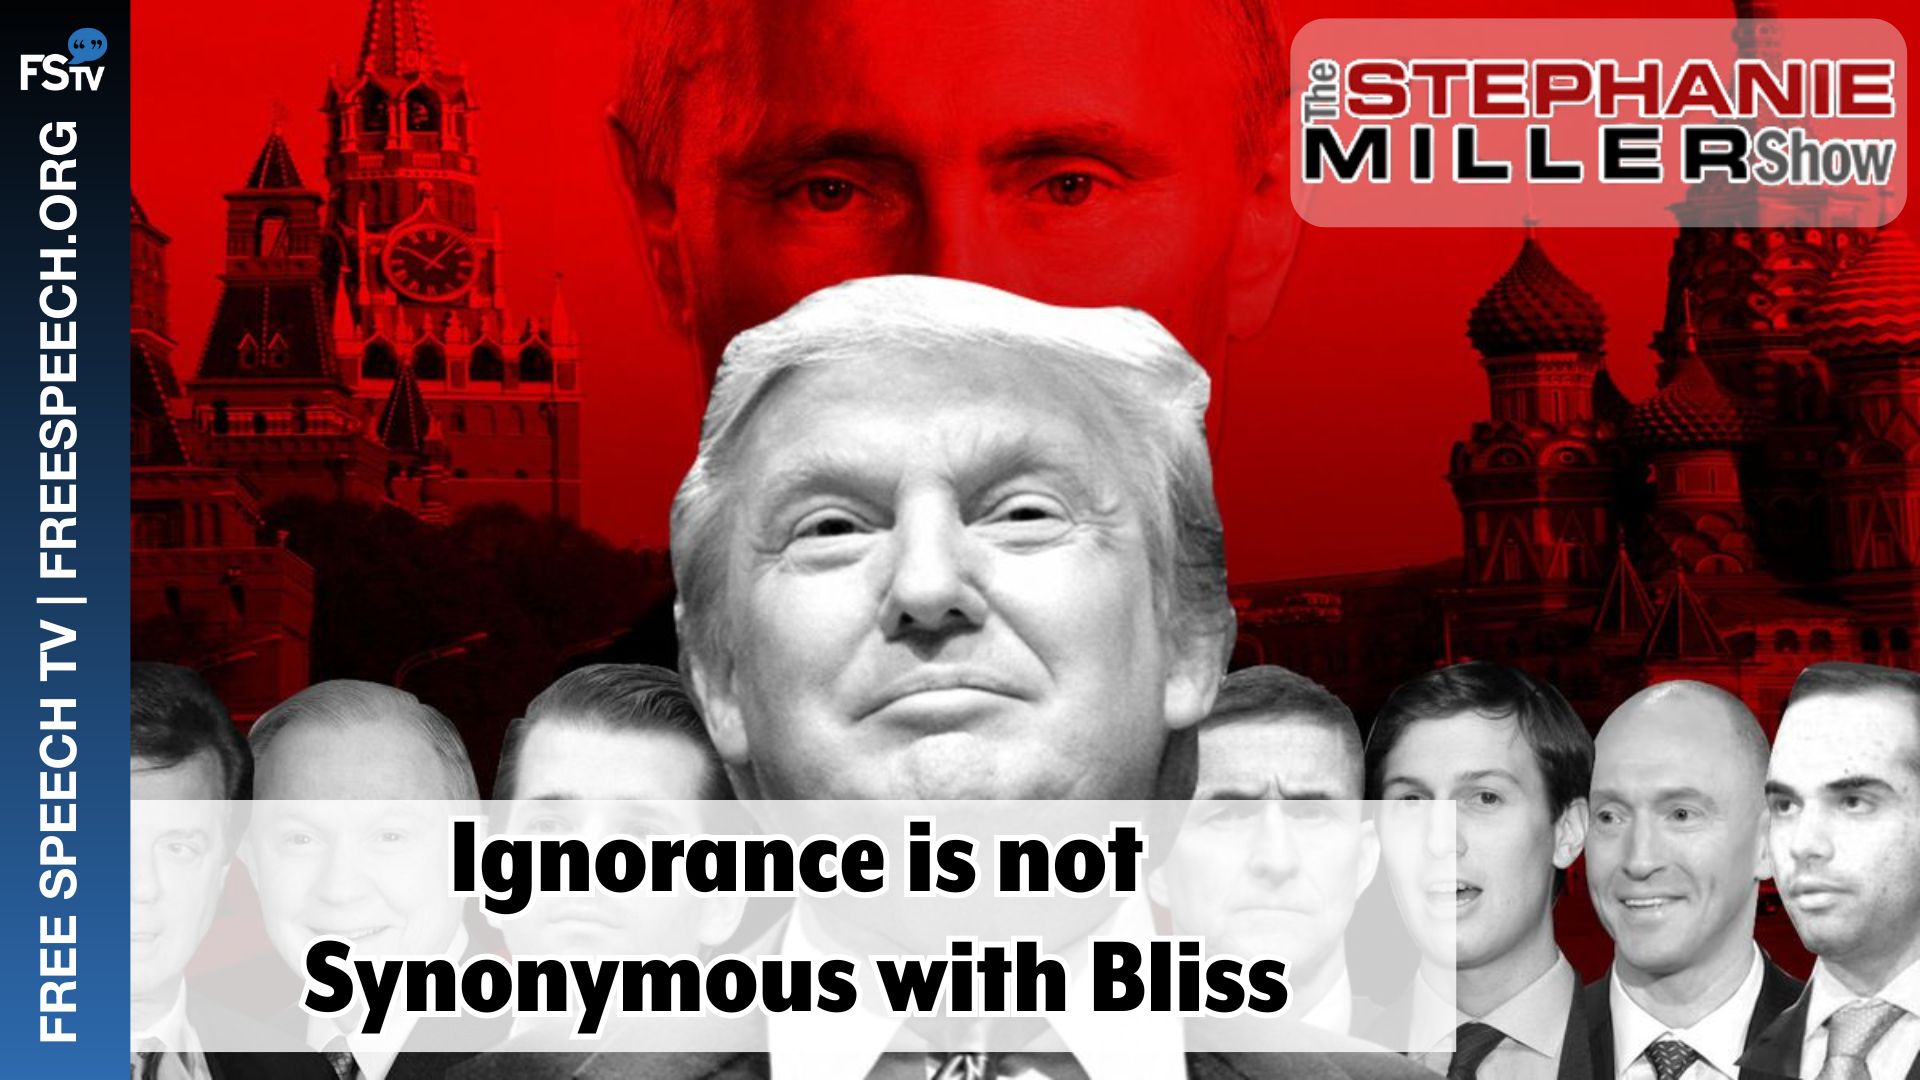 The Stephanie Miller Show | Ignorance is not Synonymous with Bliss